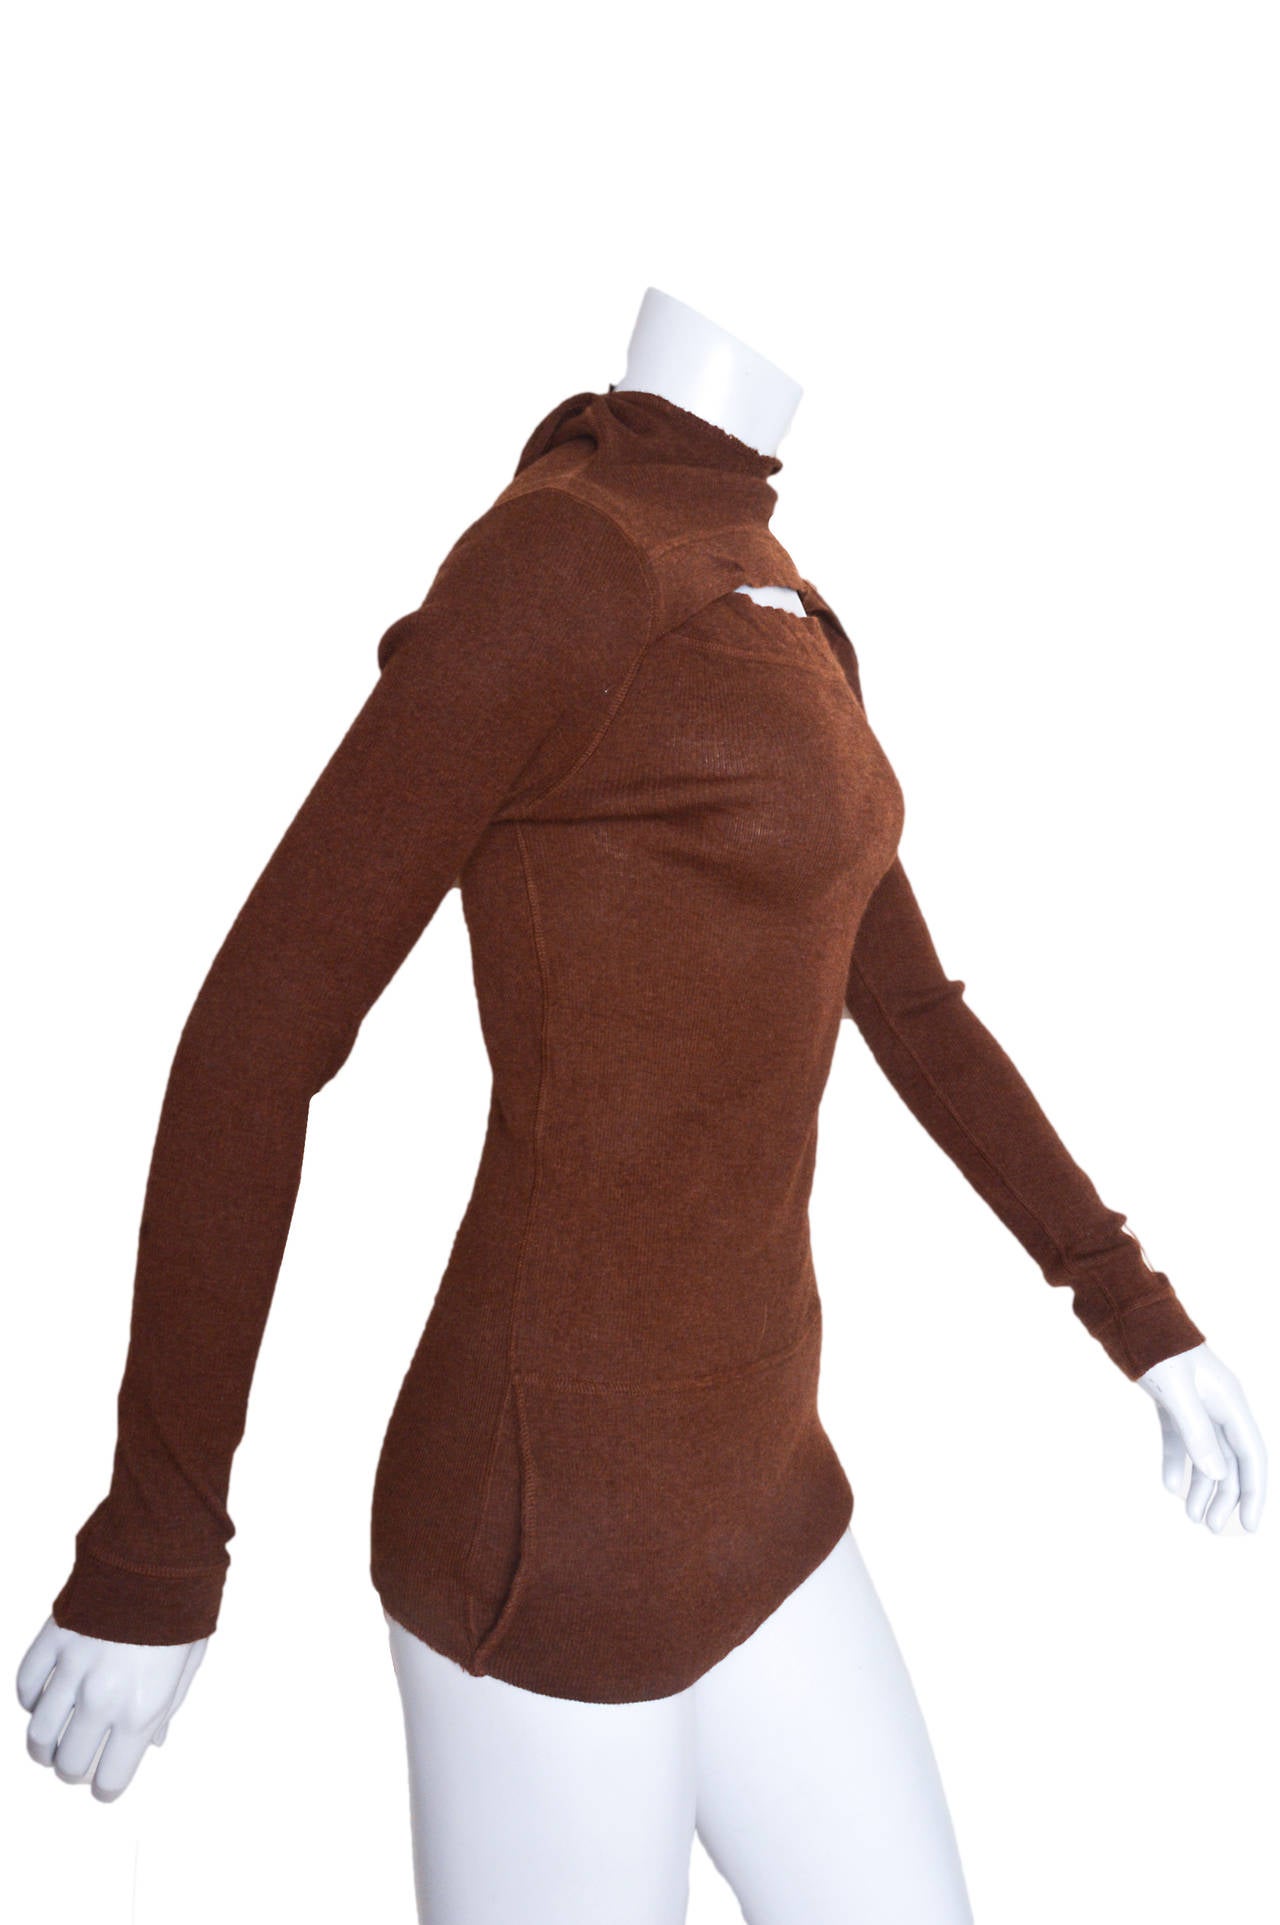 Rare Jean Paul Gaultier Maille Classique brown ribbed knit sweater.
Made in Italy by Fuzzi.
Cut out slit neck with back hood.
Kangaroo pouch pocket in front.
Banded at wrists and hem.
Very stretchy, body hugging.